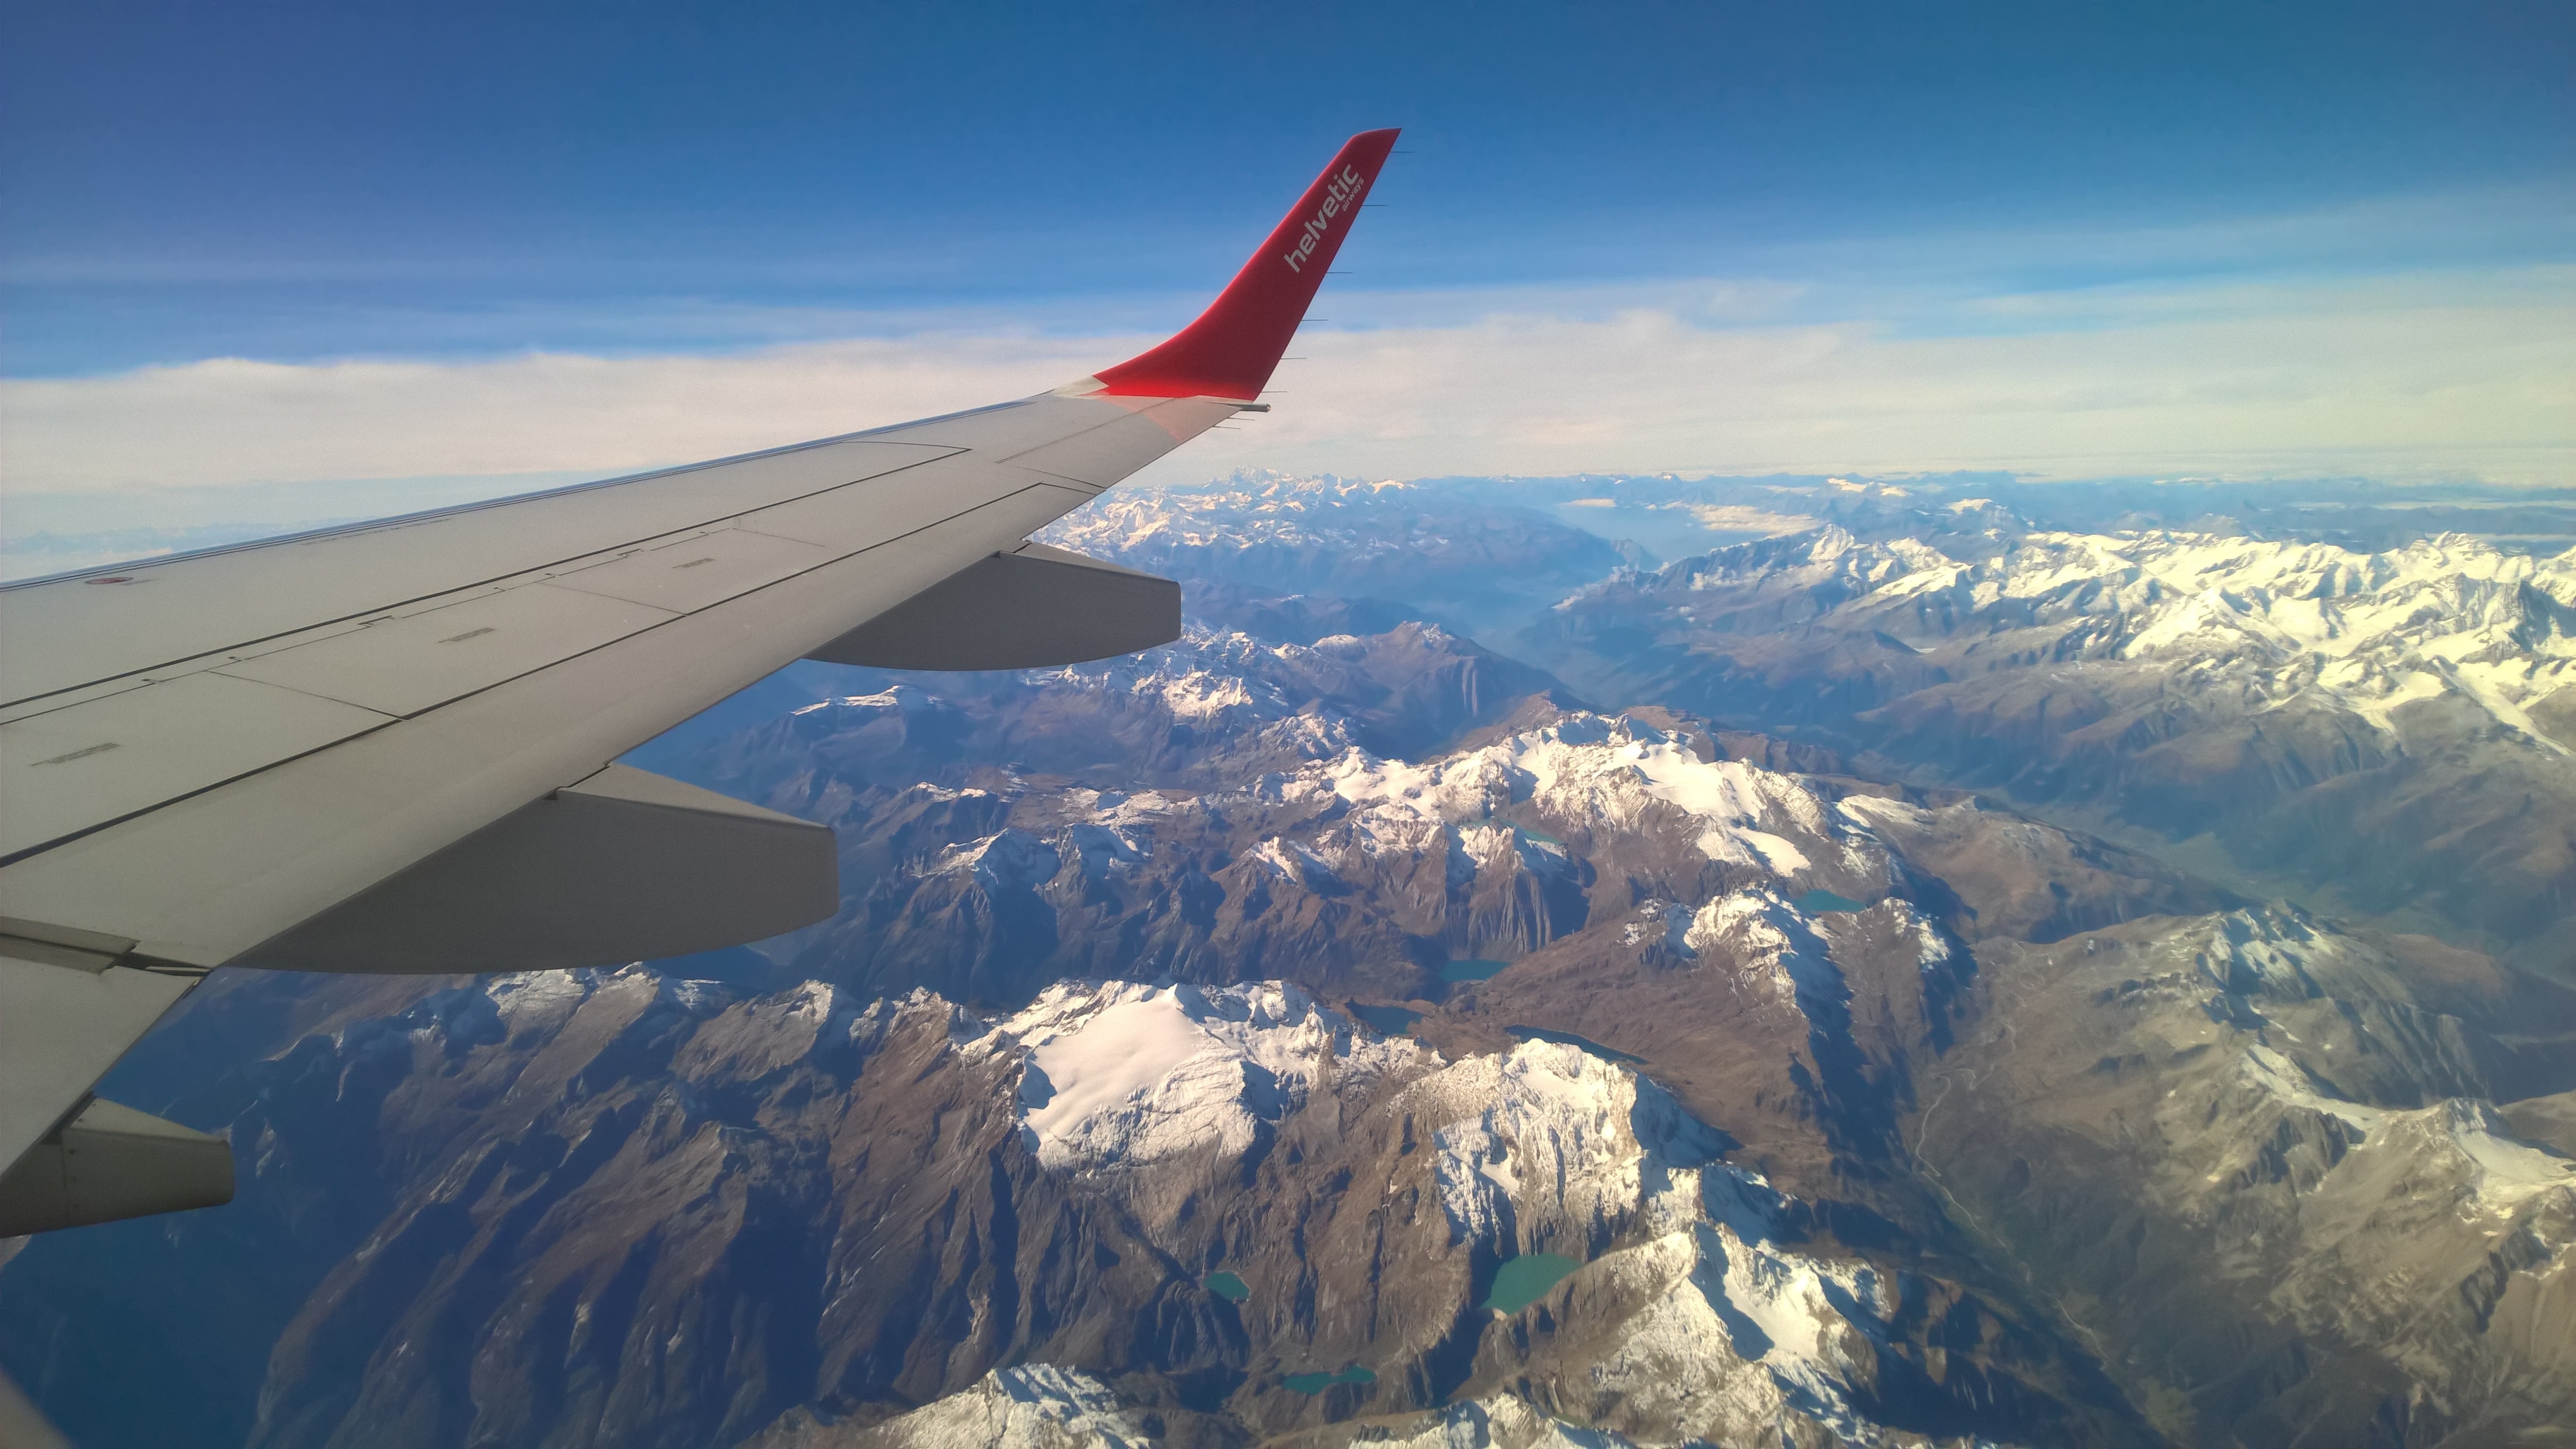 red and gray airplane wings with aerial view photo of snowy mountains